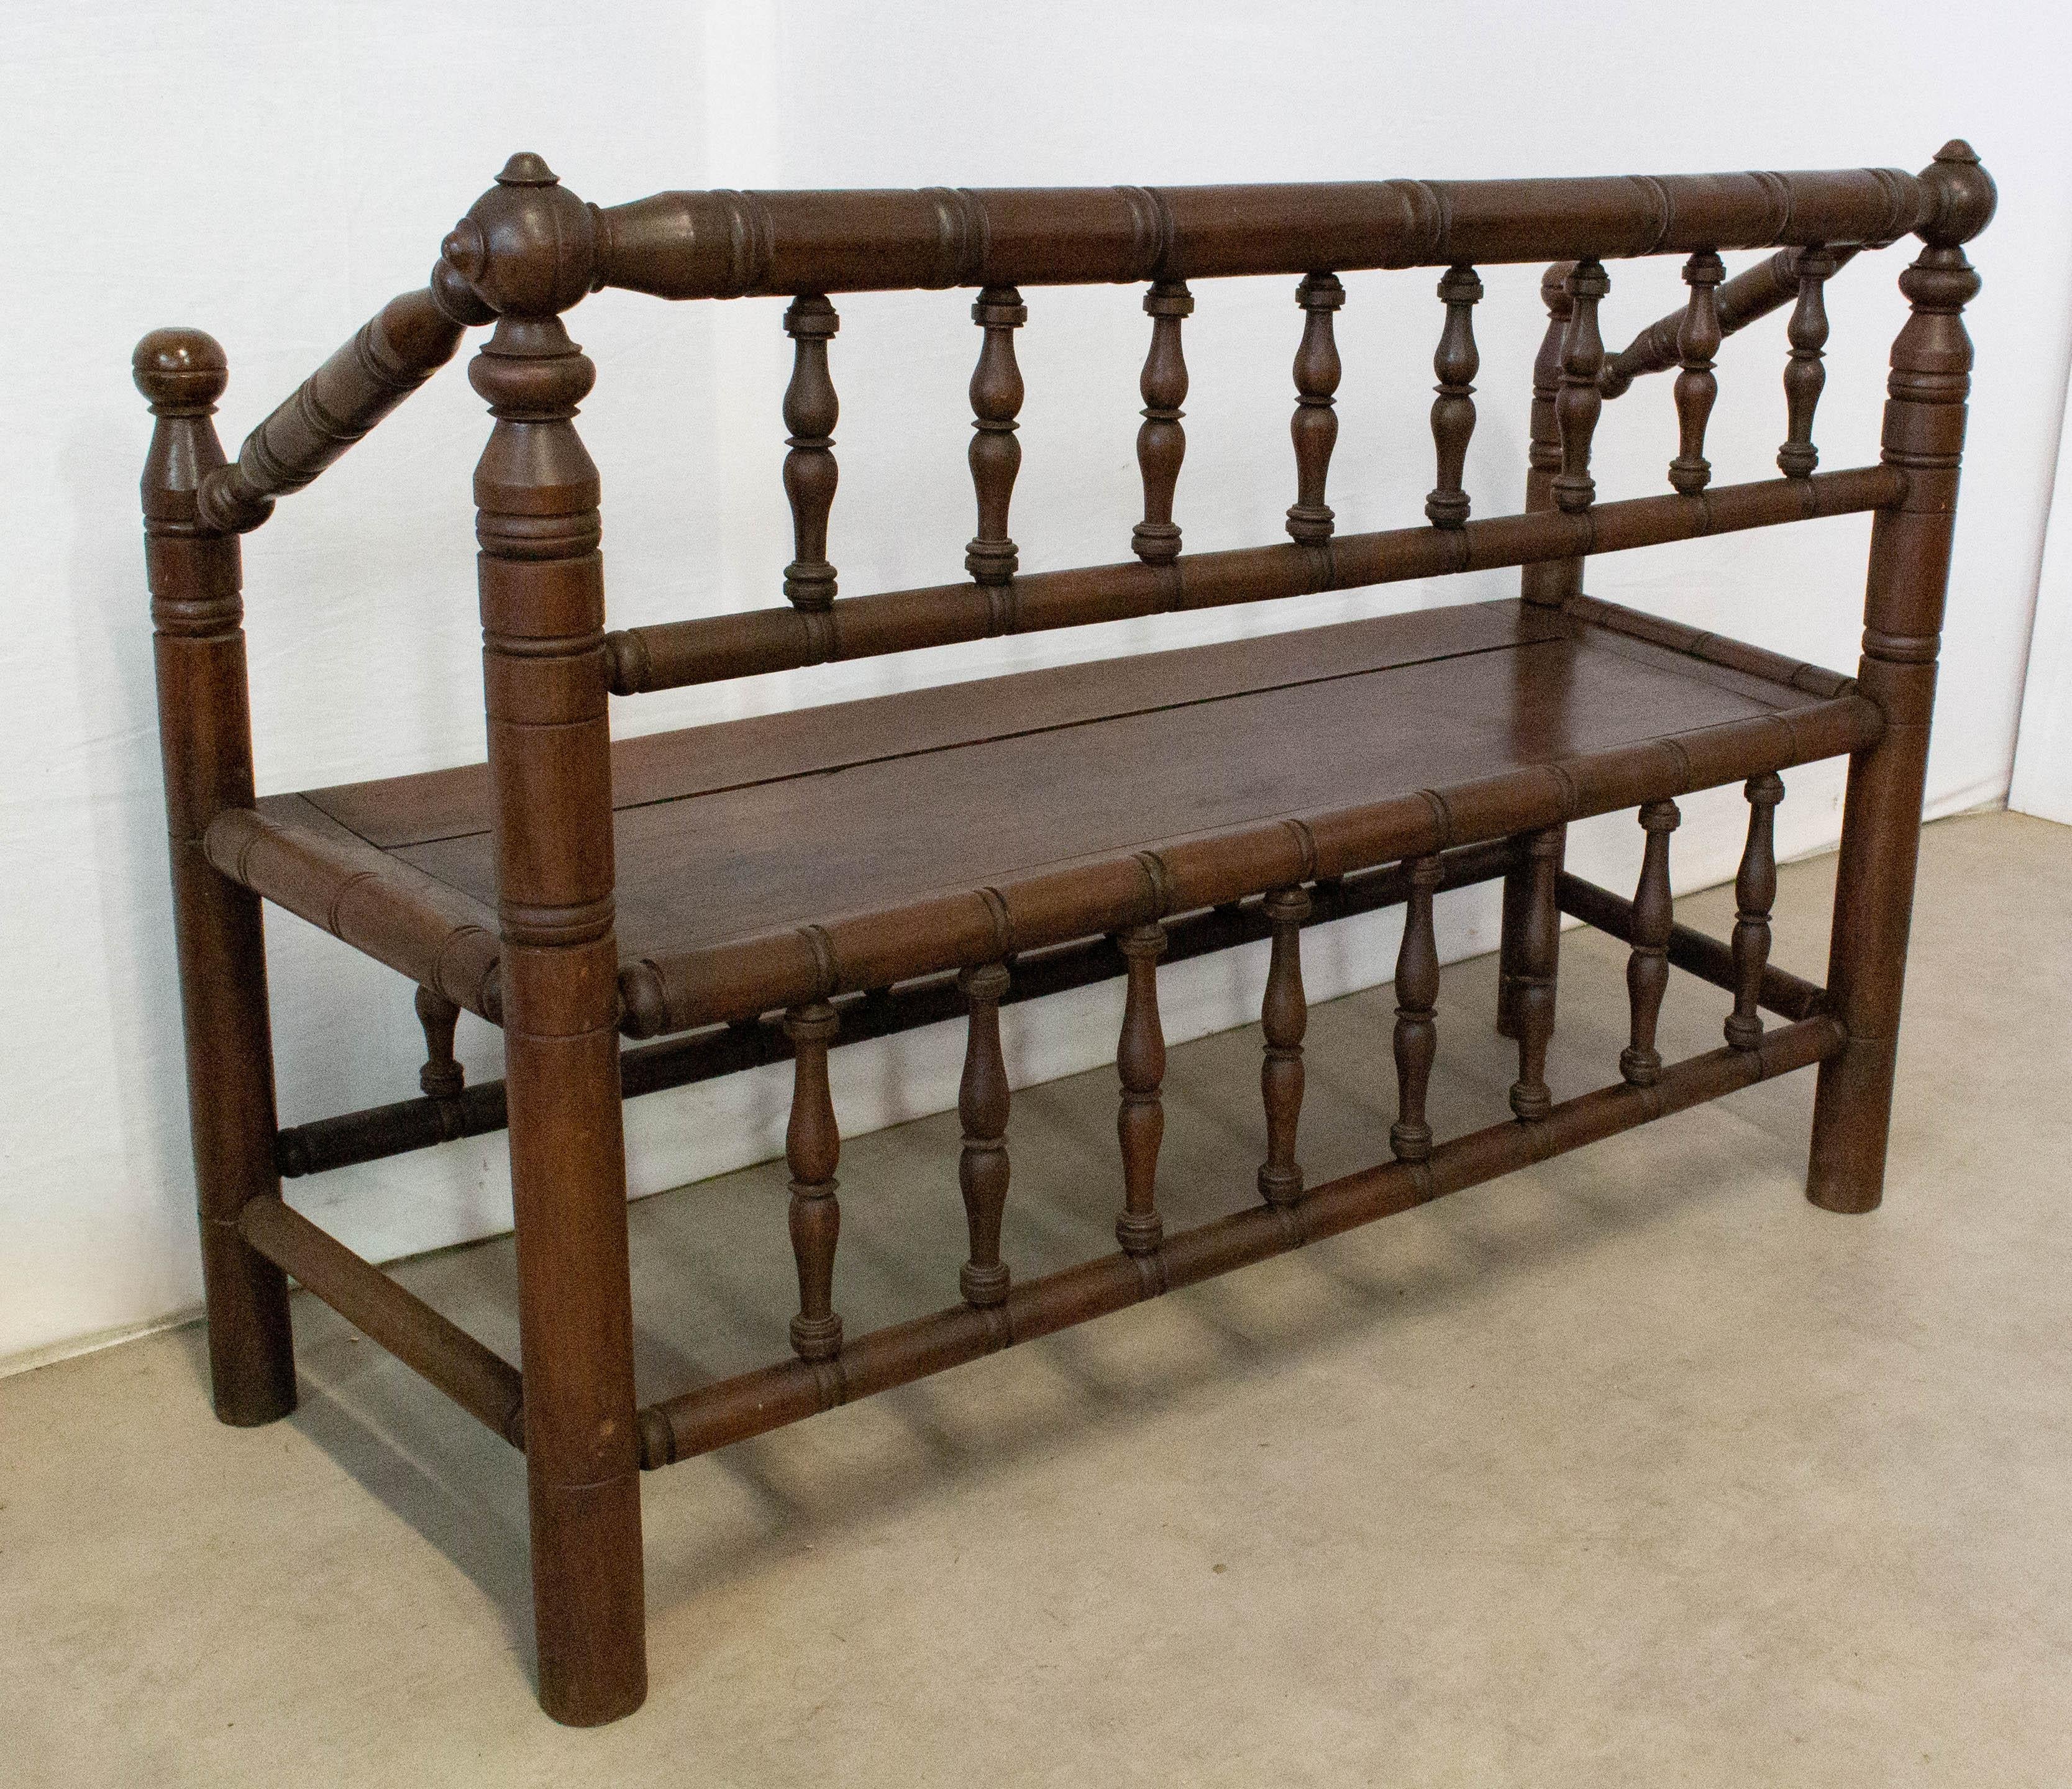 Early 20th Century 20th Century Bench in Turner's Chairs Style French Provincial Baluster Bench For Sale